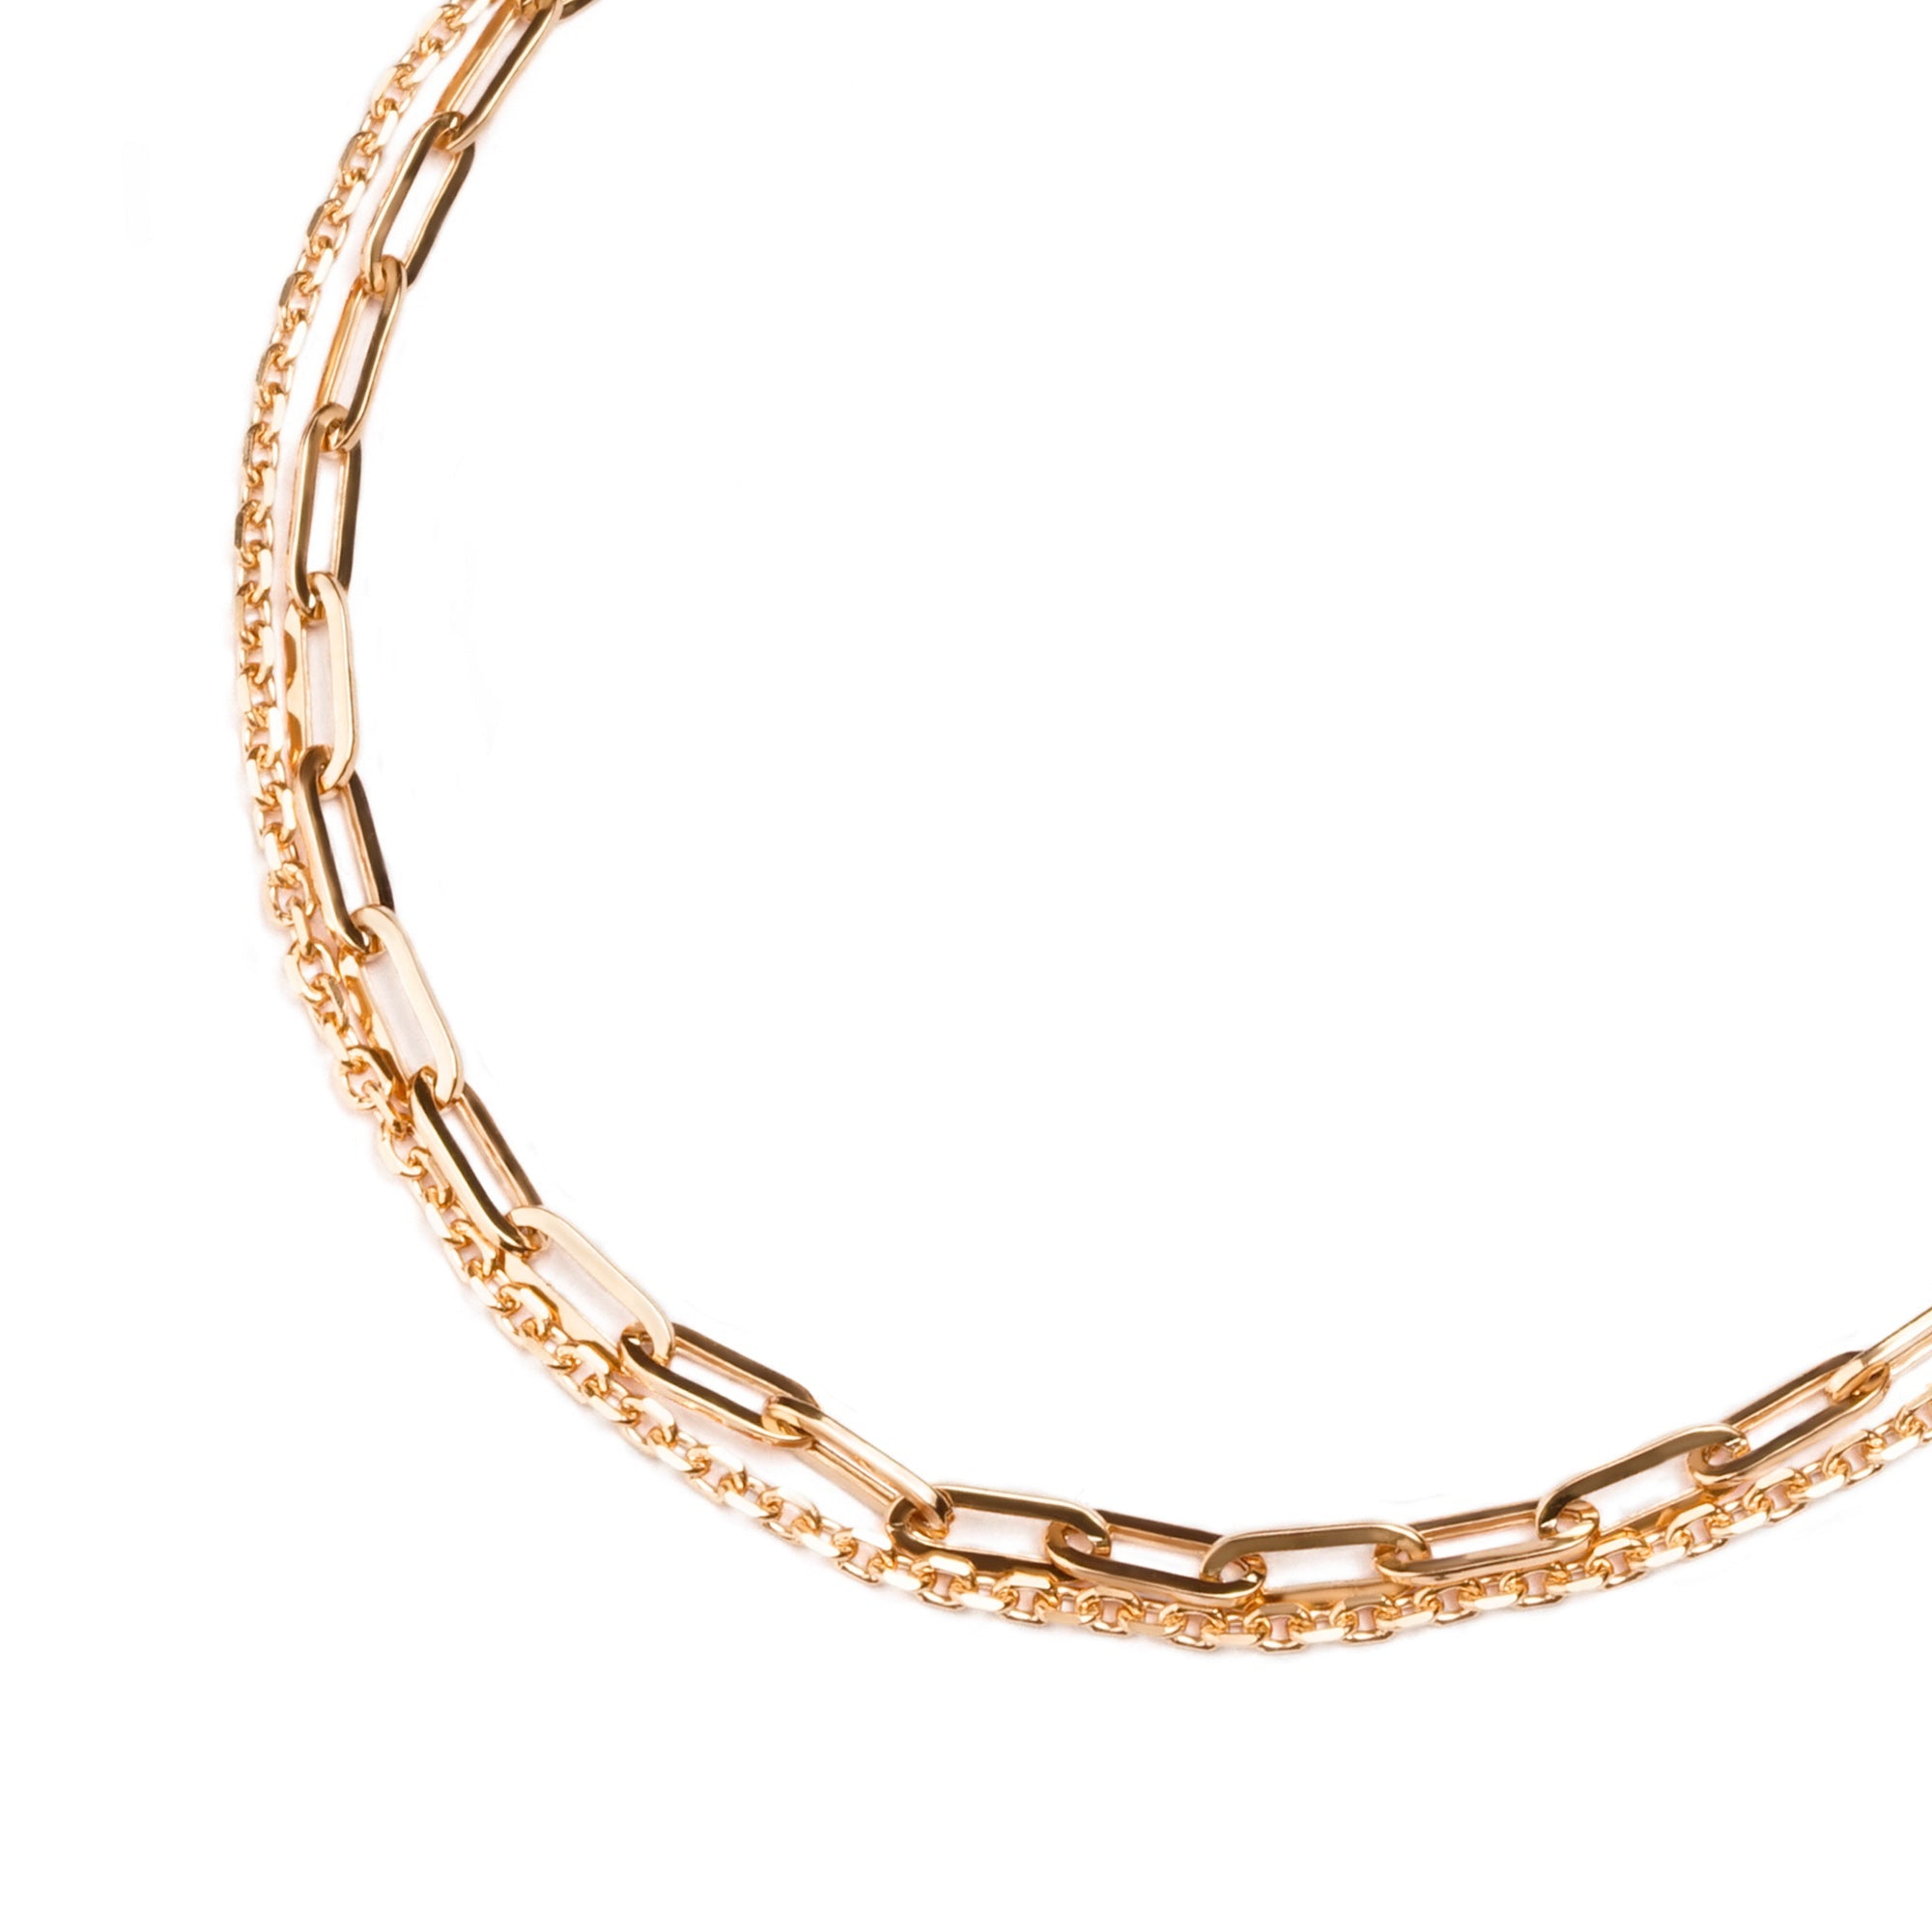 Somi Gold Bracelet - Modest Collection - Juene Jewelry